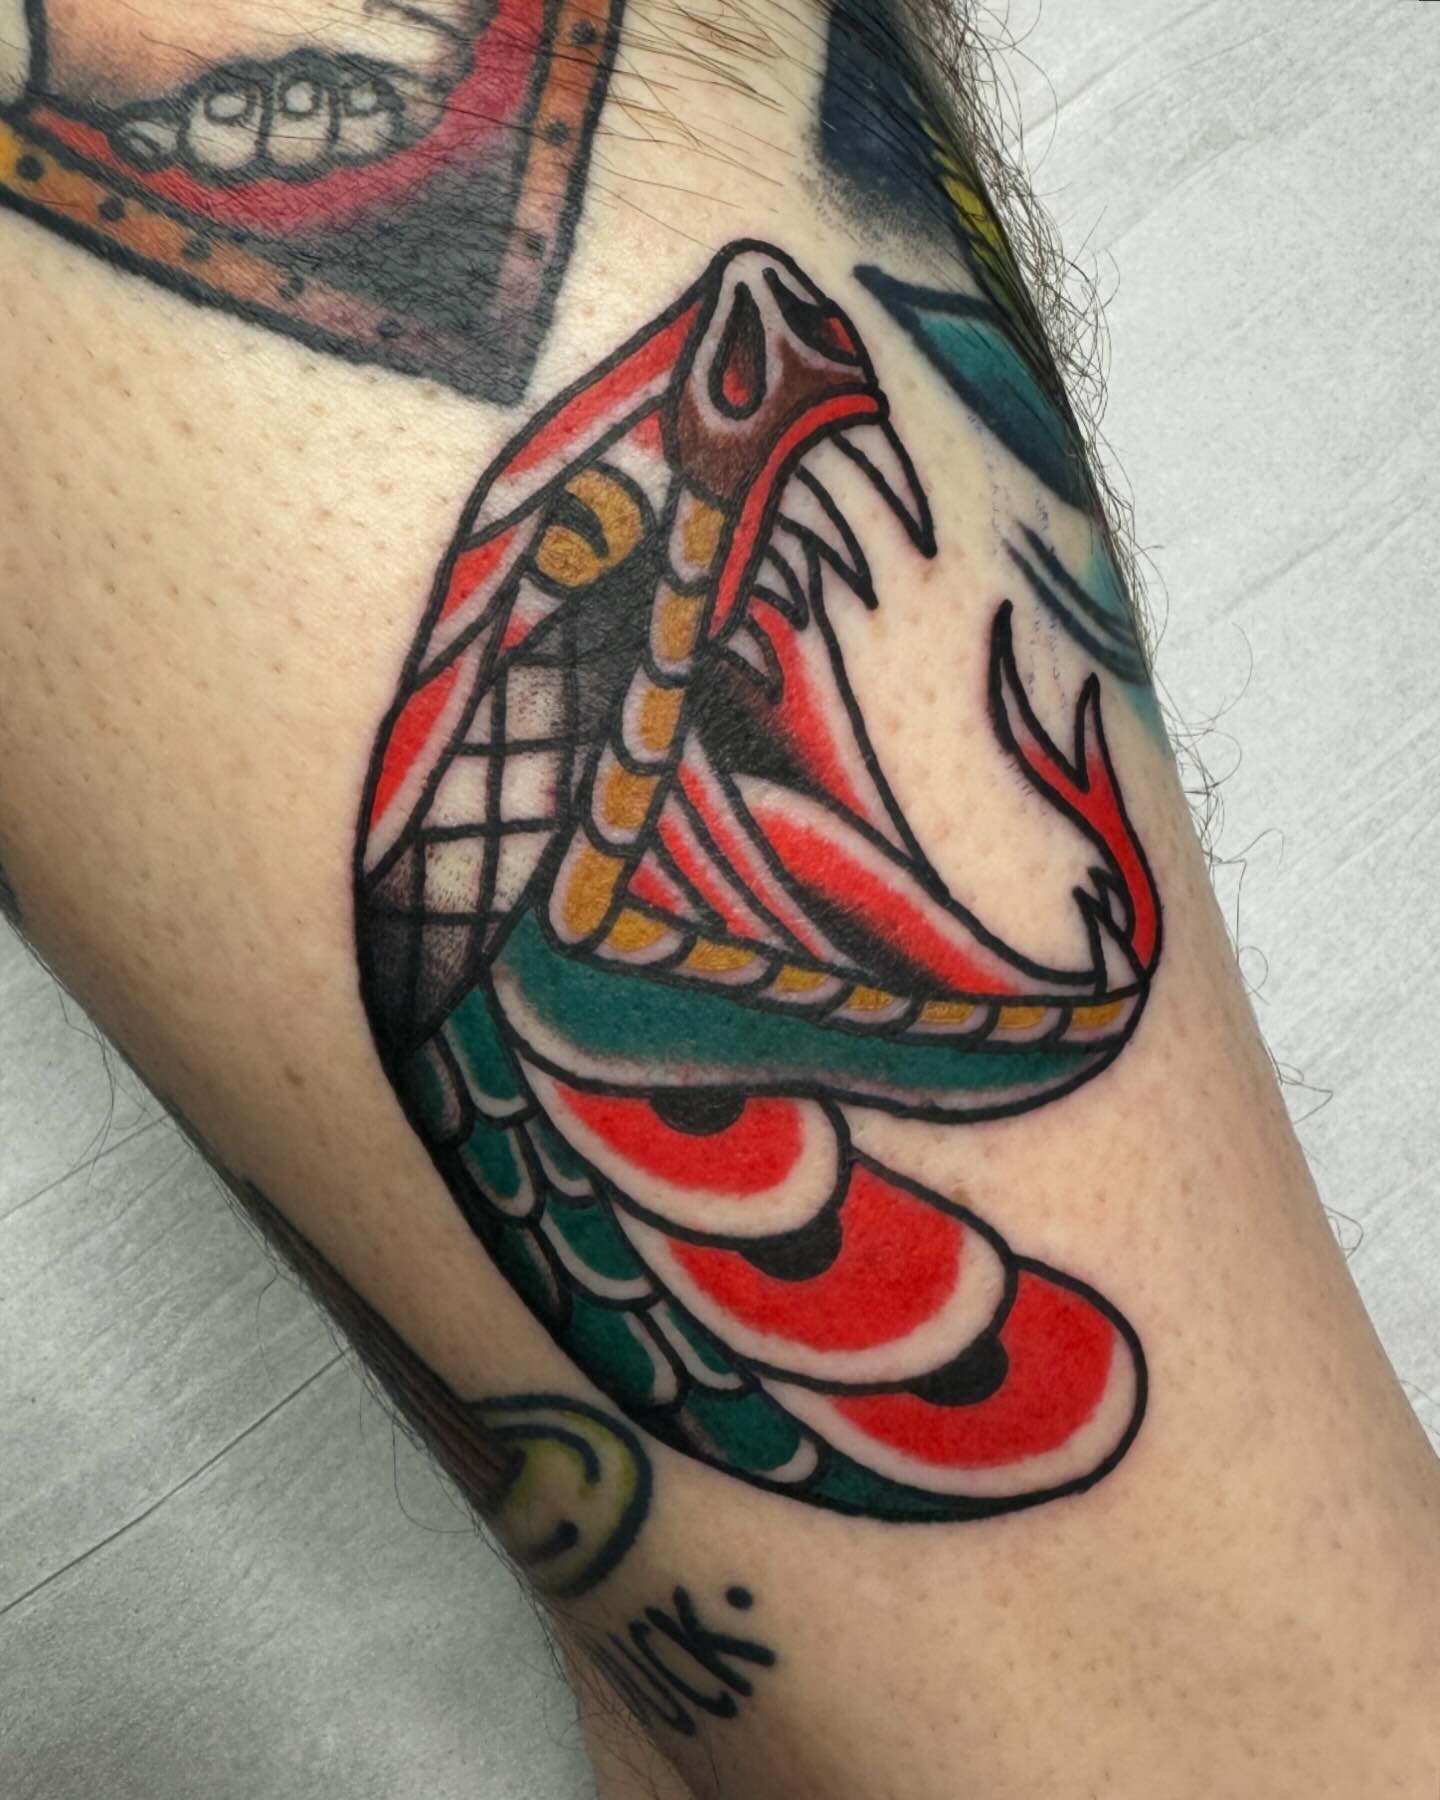 Couple of fun ones for my mate, cheers Mark!
.
.
.
.
,
#traditionaltattoo #traditionalsnake #colourtattoo #tradtattoo #stokeontrenttattoo #whyarentyouatthebarrackstattoostudio